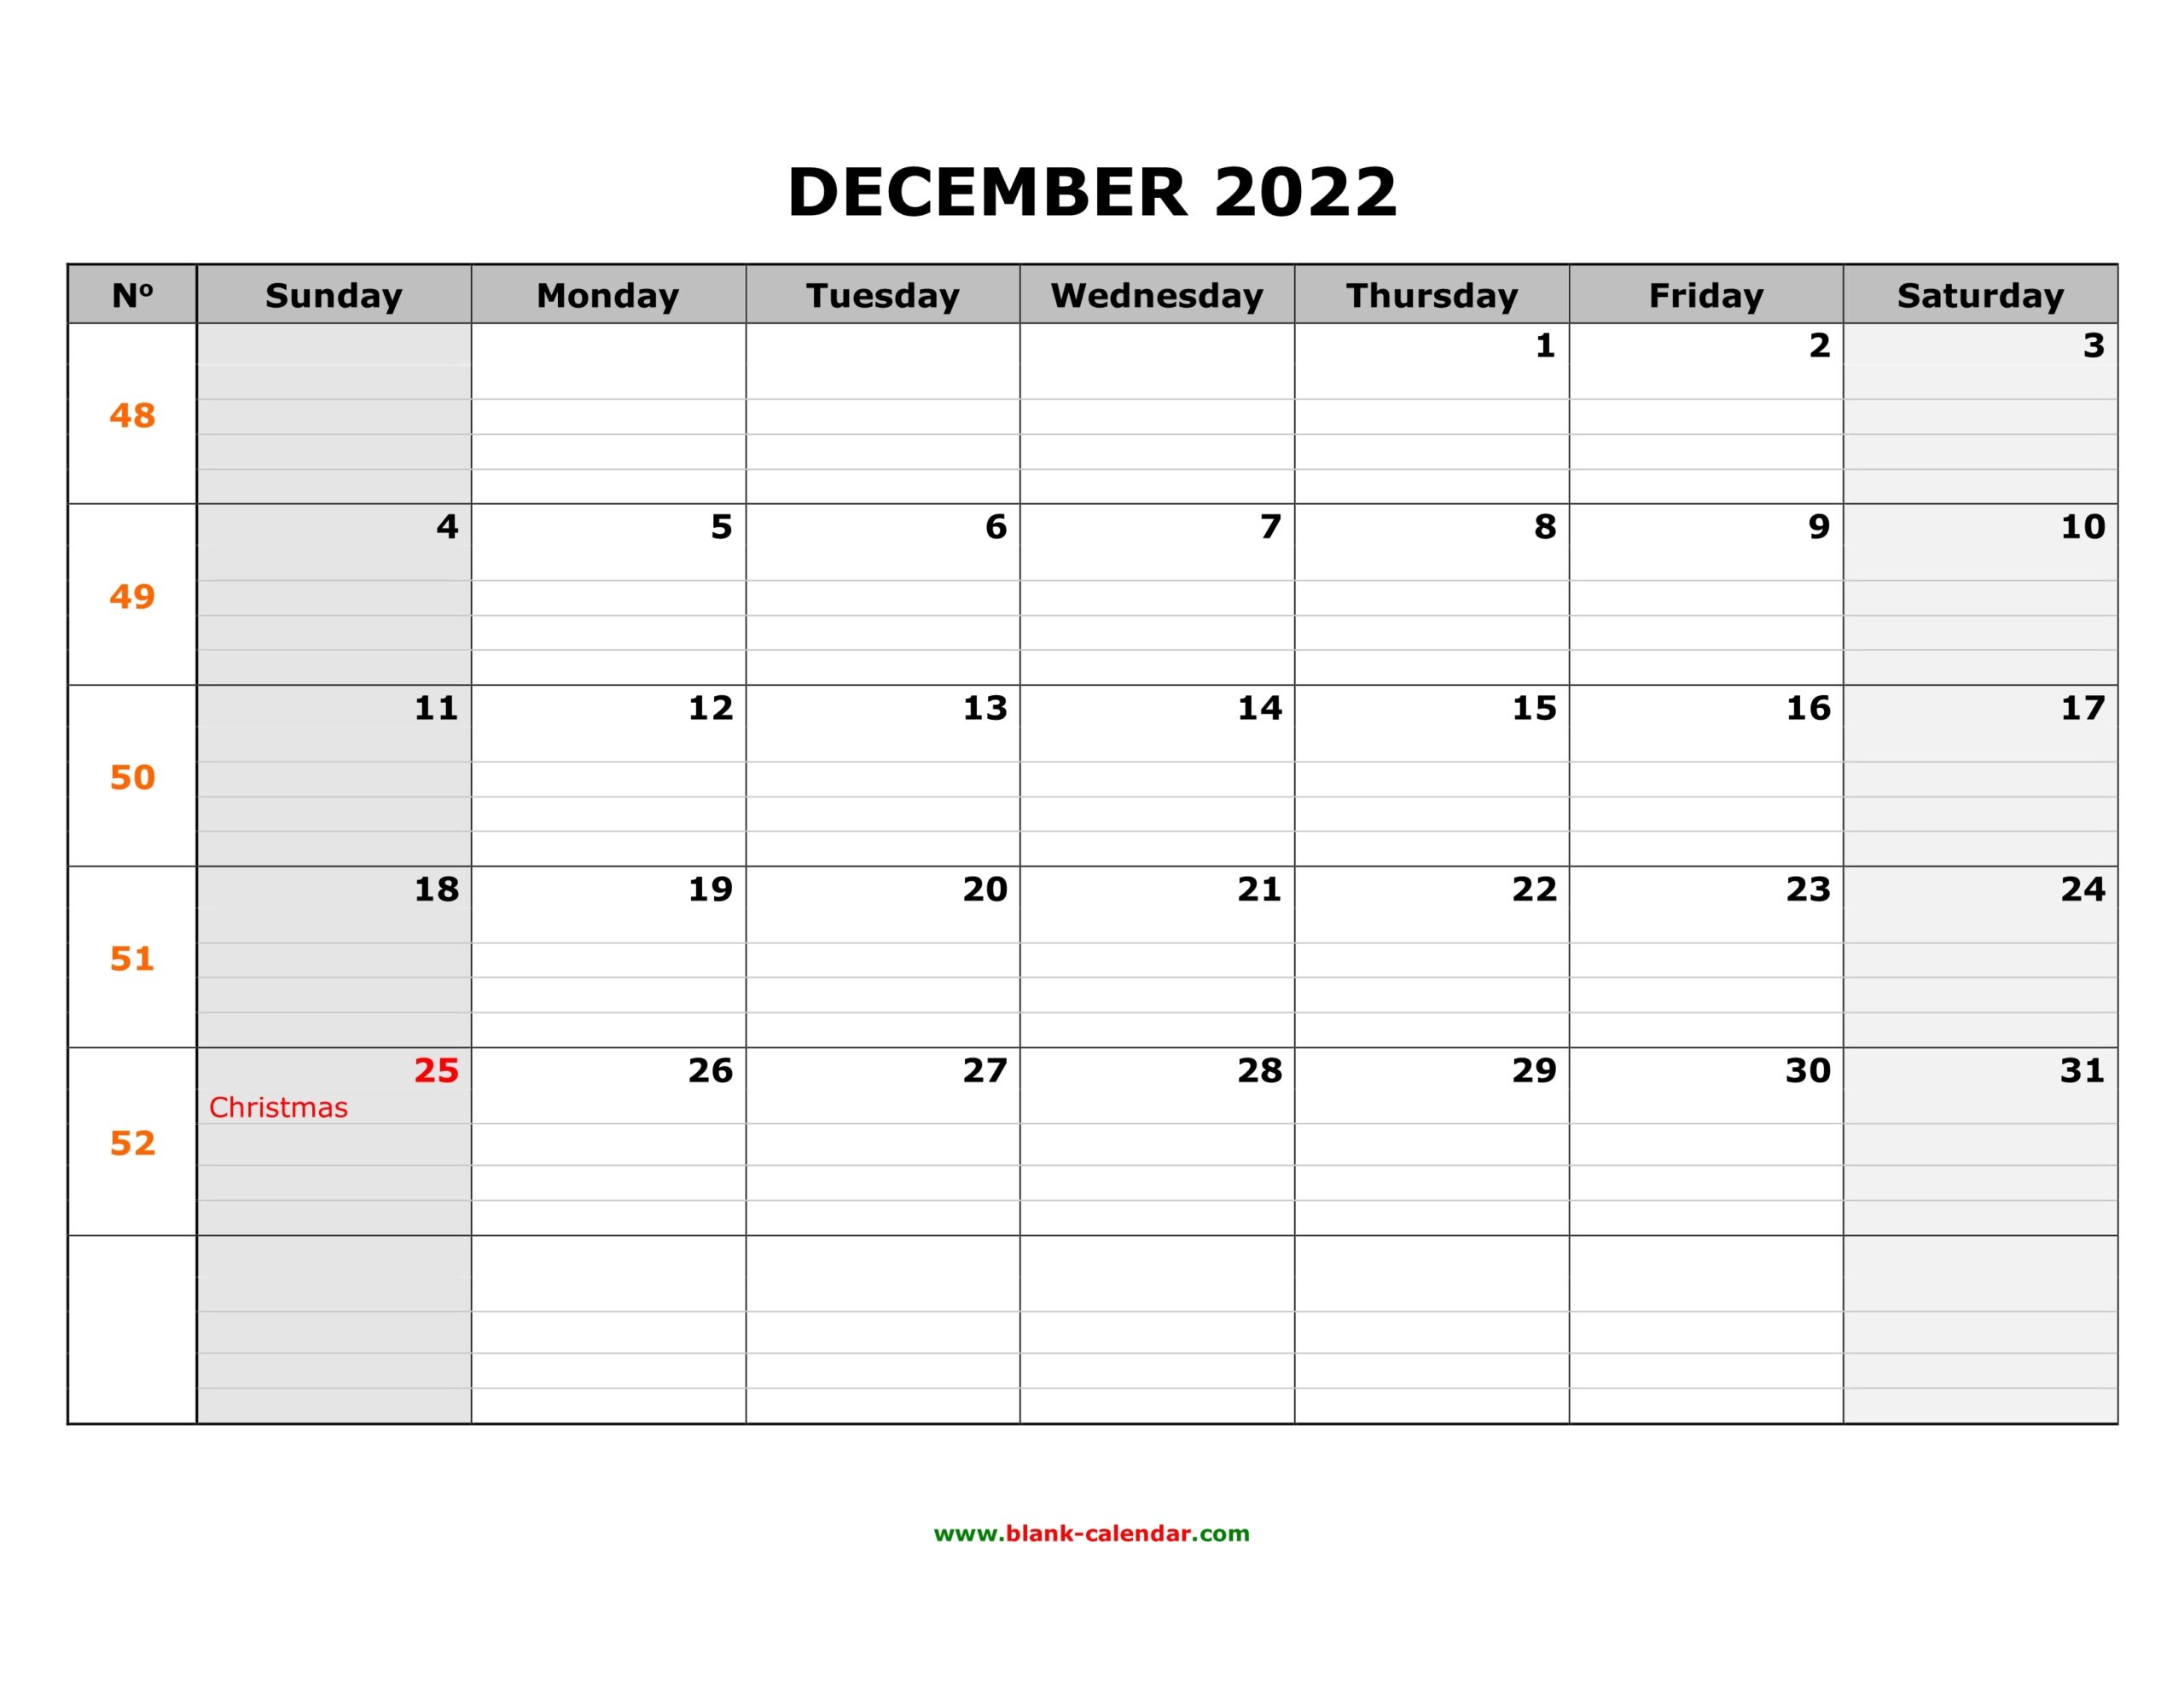 Free Download Printable December 2022 Calendar Large Box Grid Space For Notes